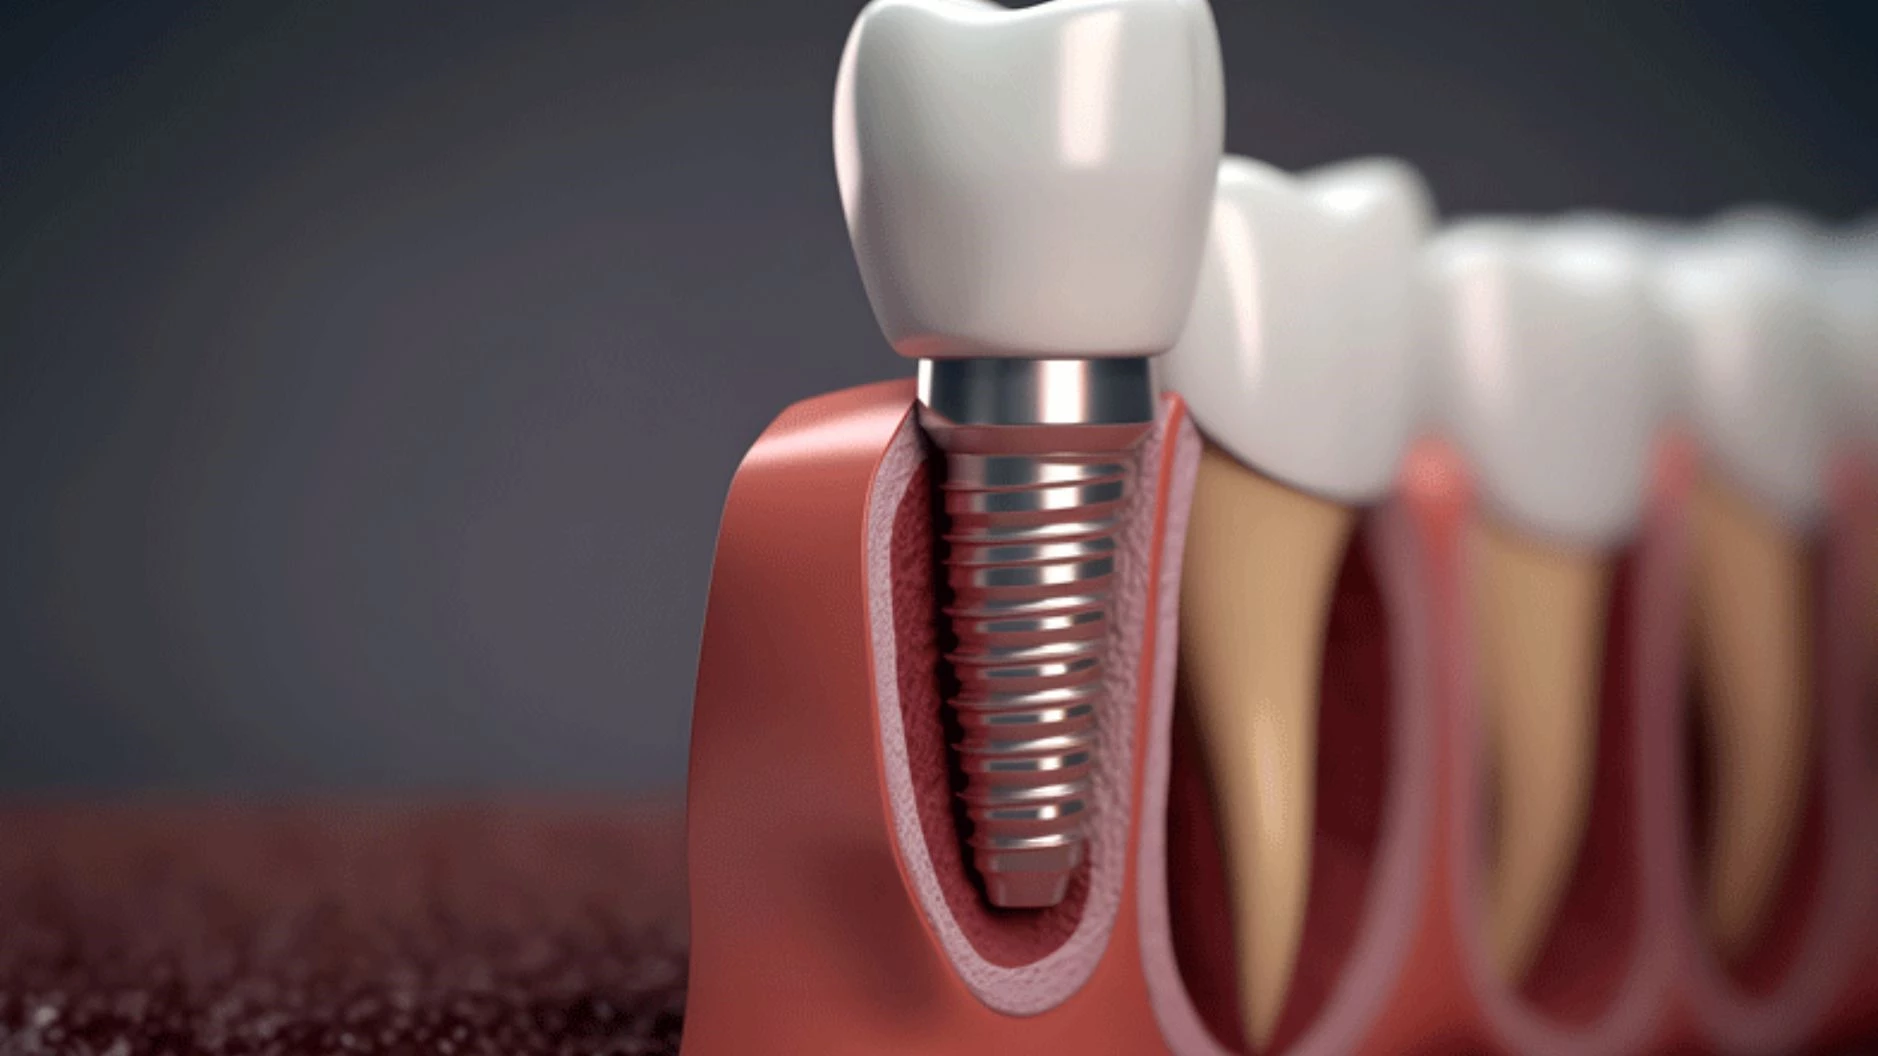 Full Mouth Dental Implants A Revolutionary Solution for Total Tooth Loss